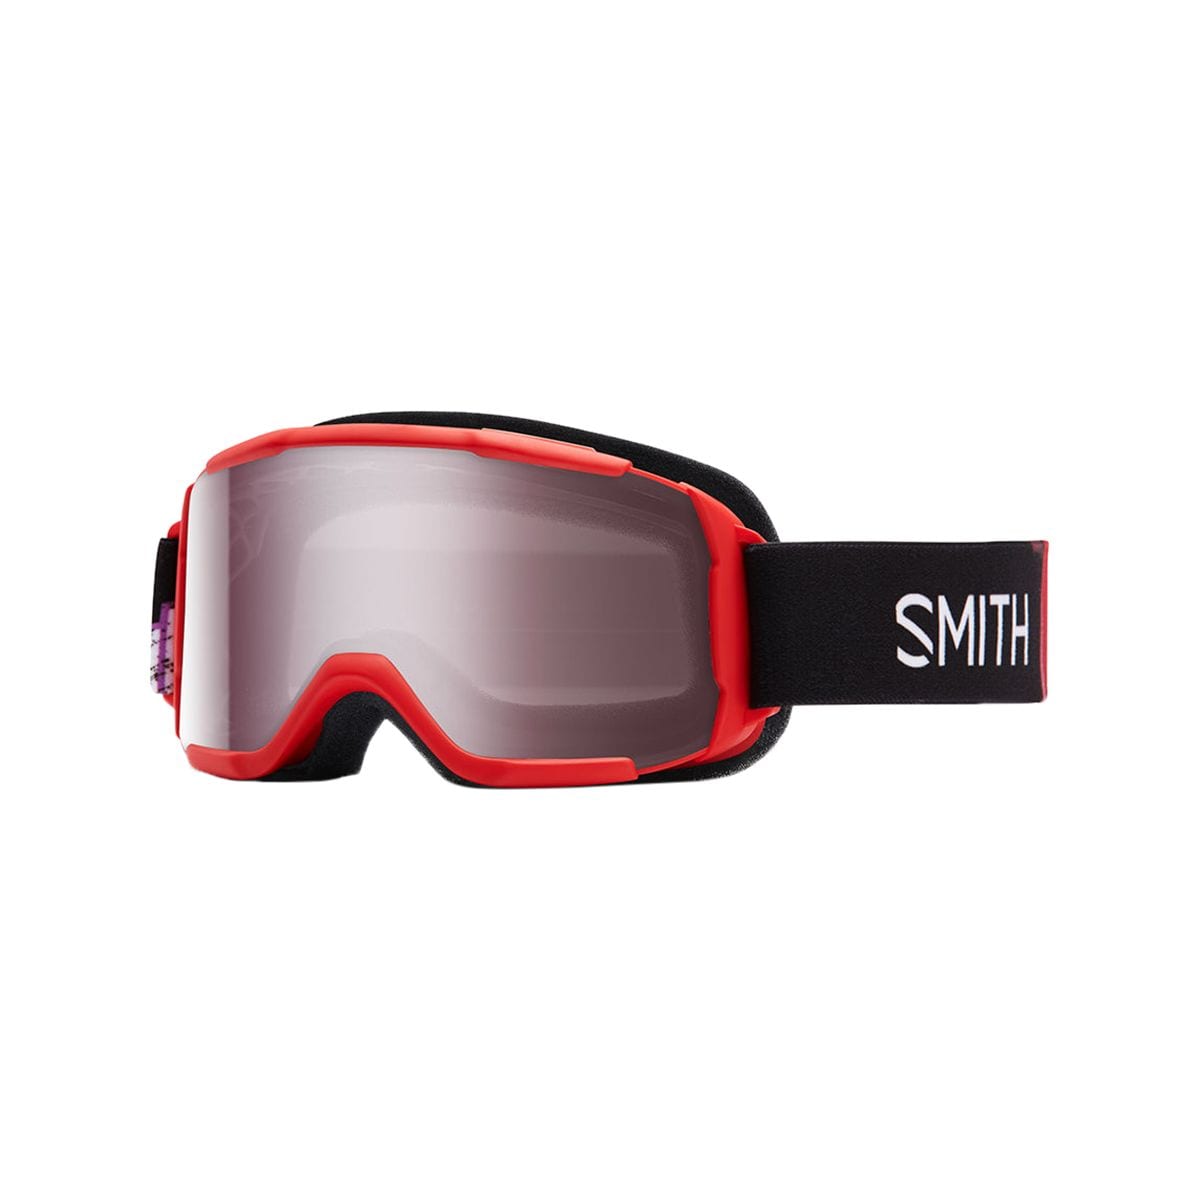 Smith Daredevil OTG Goggles - Kids' Red Angry Birds/Ignitor Mirror